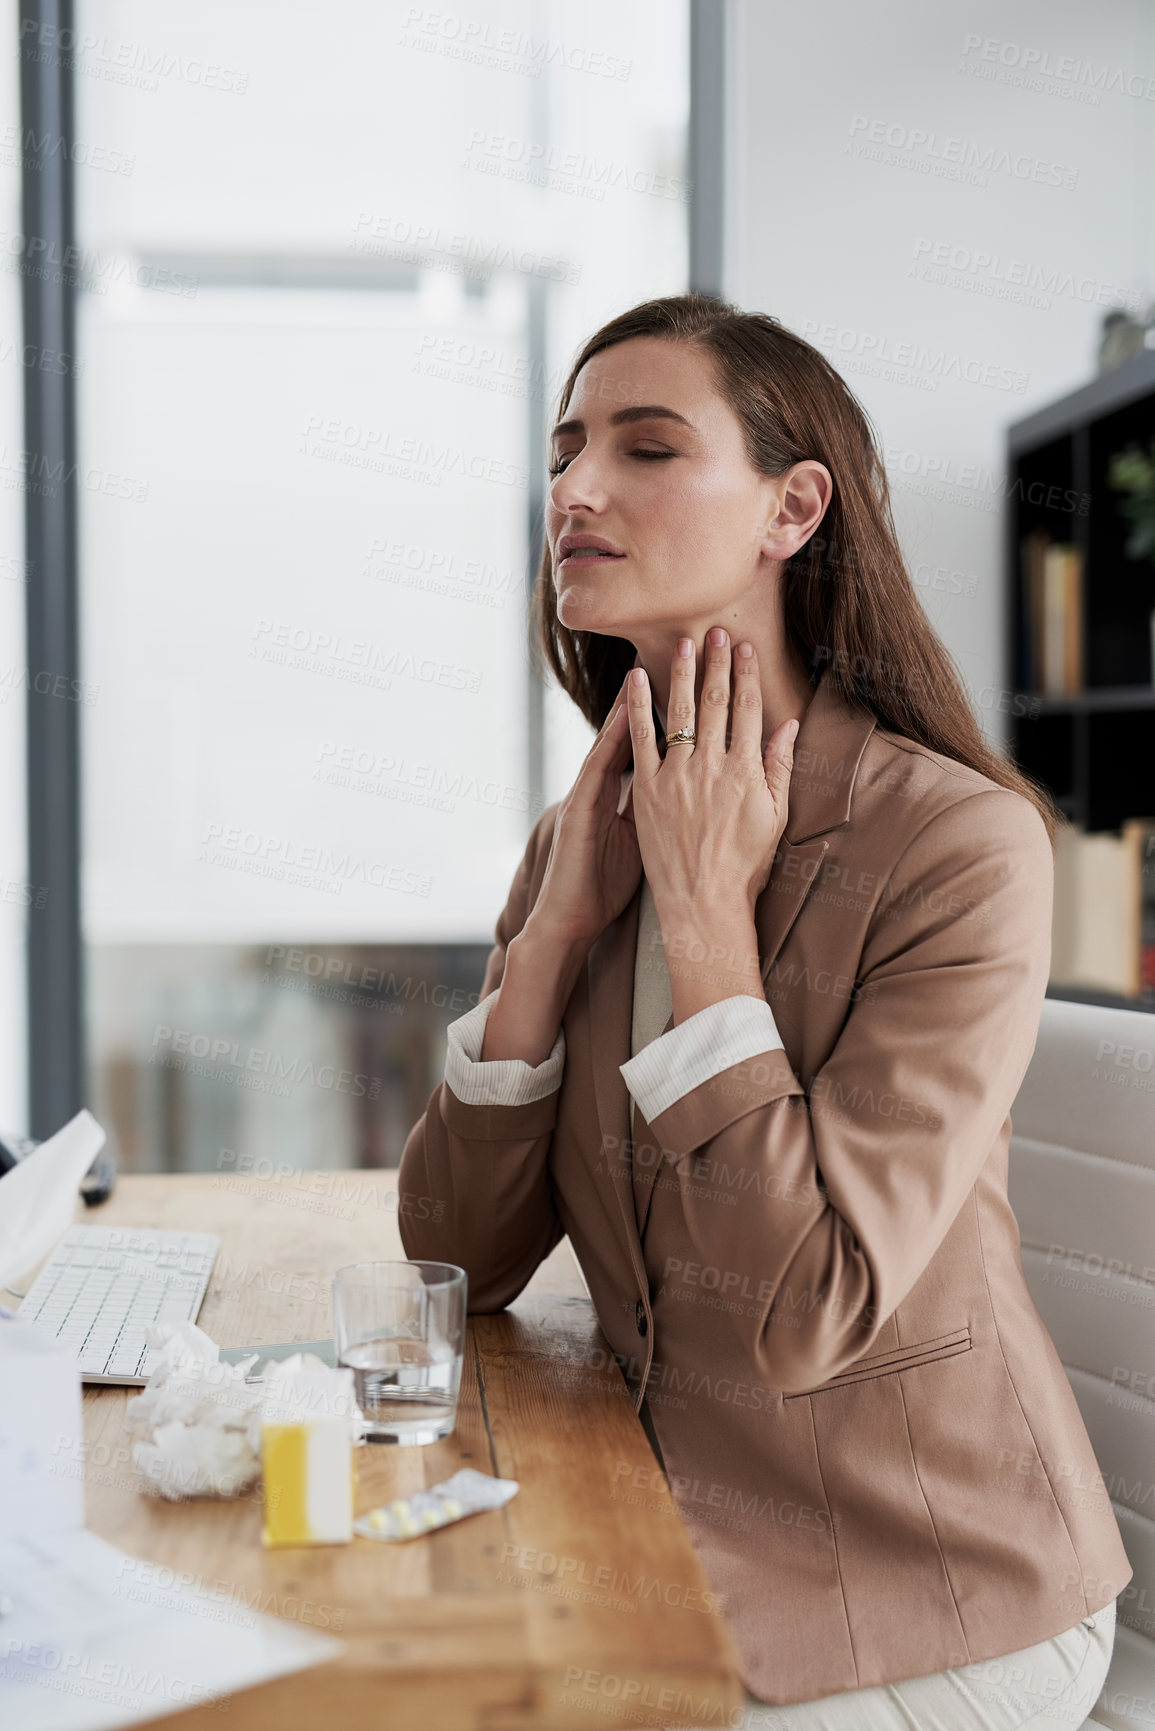 Buy stock photo Shot of a young businesswoman experiencing throat pain while working in an office